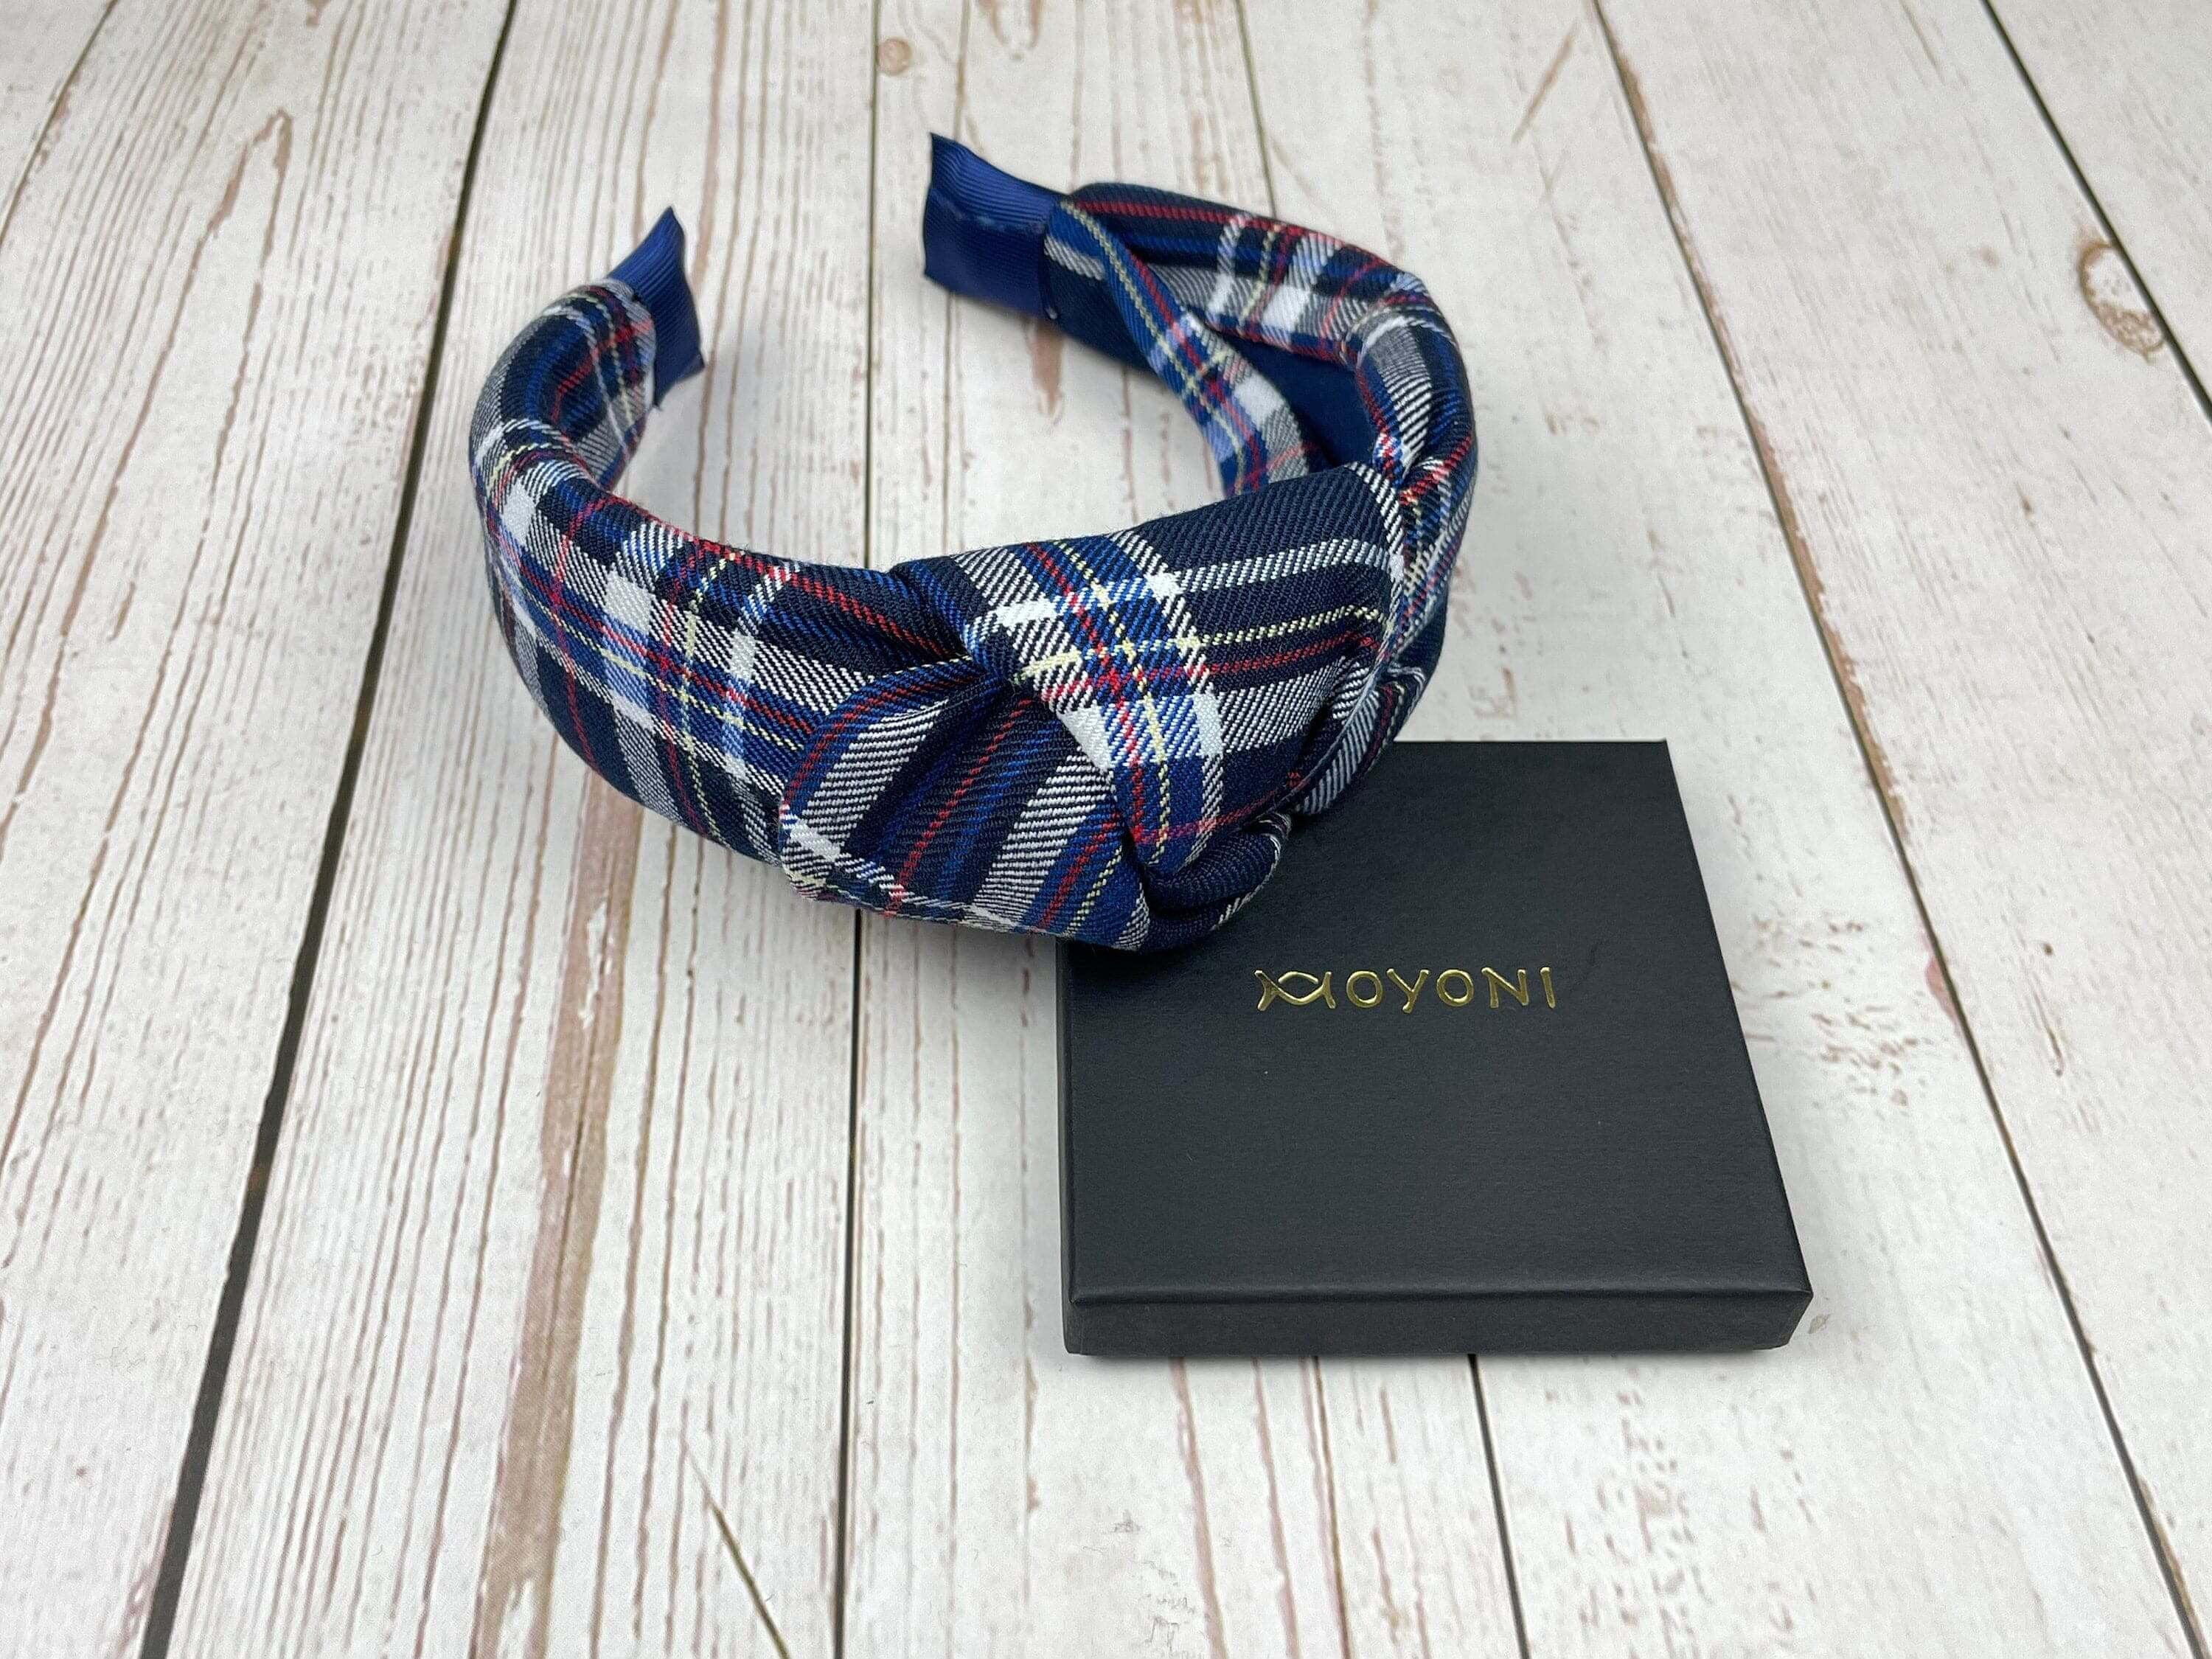 Add a touch of style to your ensemble with this blue plaid pattern headband. It is sure to compliment any outfit and look great with any hairstyle.